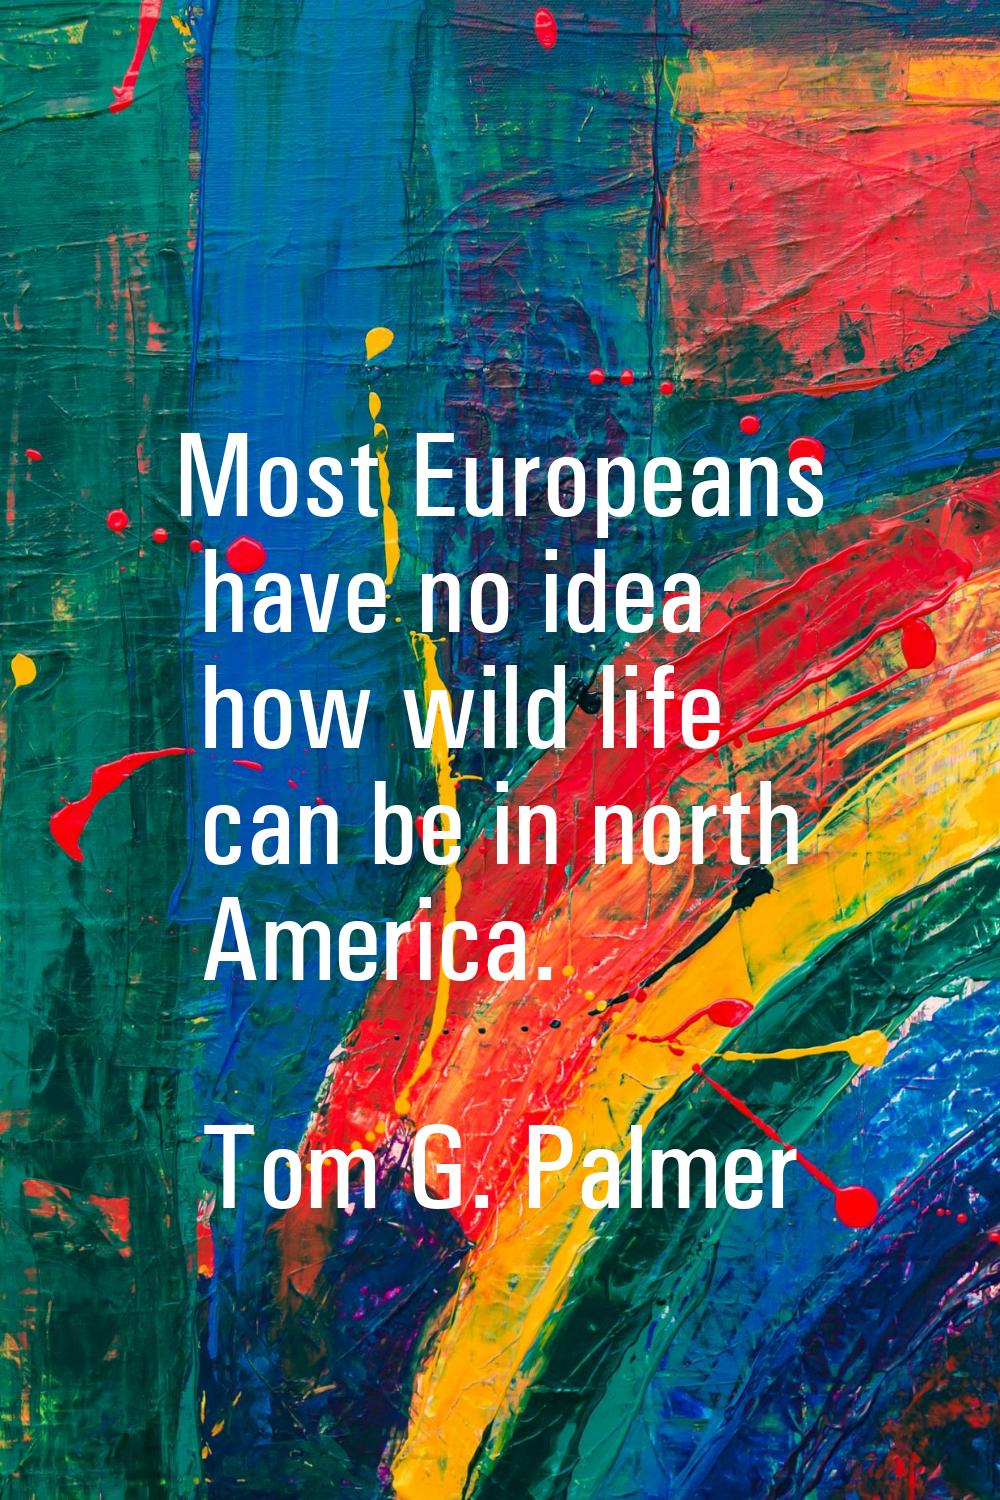 Most Europeans have no idea how wild life can be in north America.